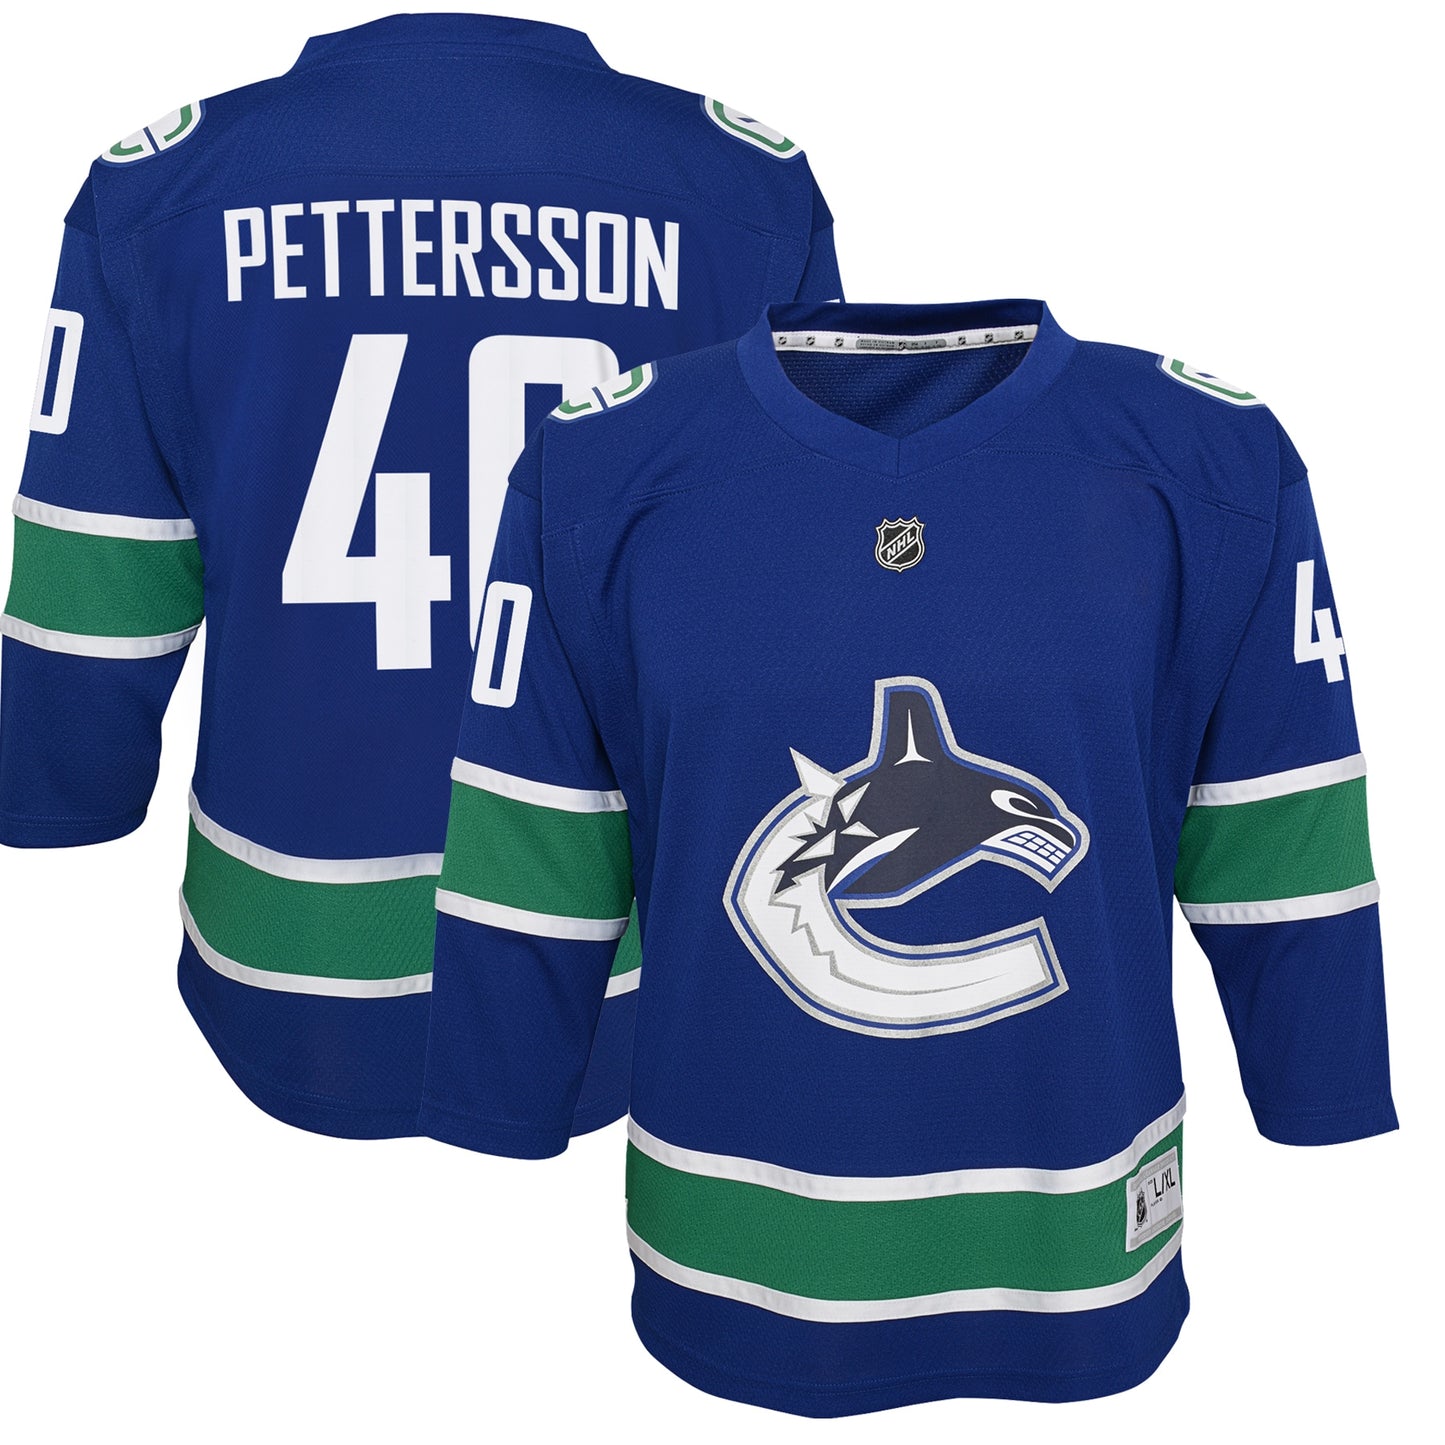 Elias Pettersson Vancouver Canucks Youth 2019/20 Home Replica Player Jersey - Royal